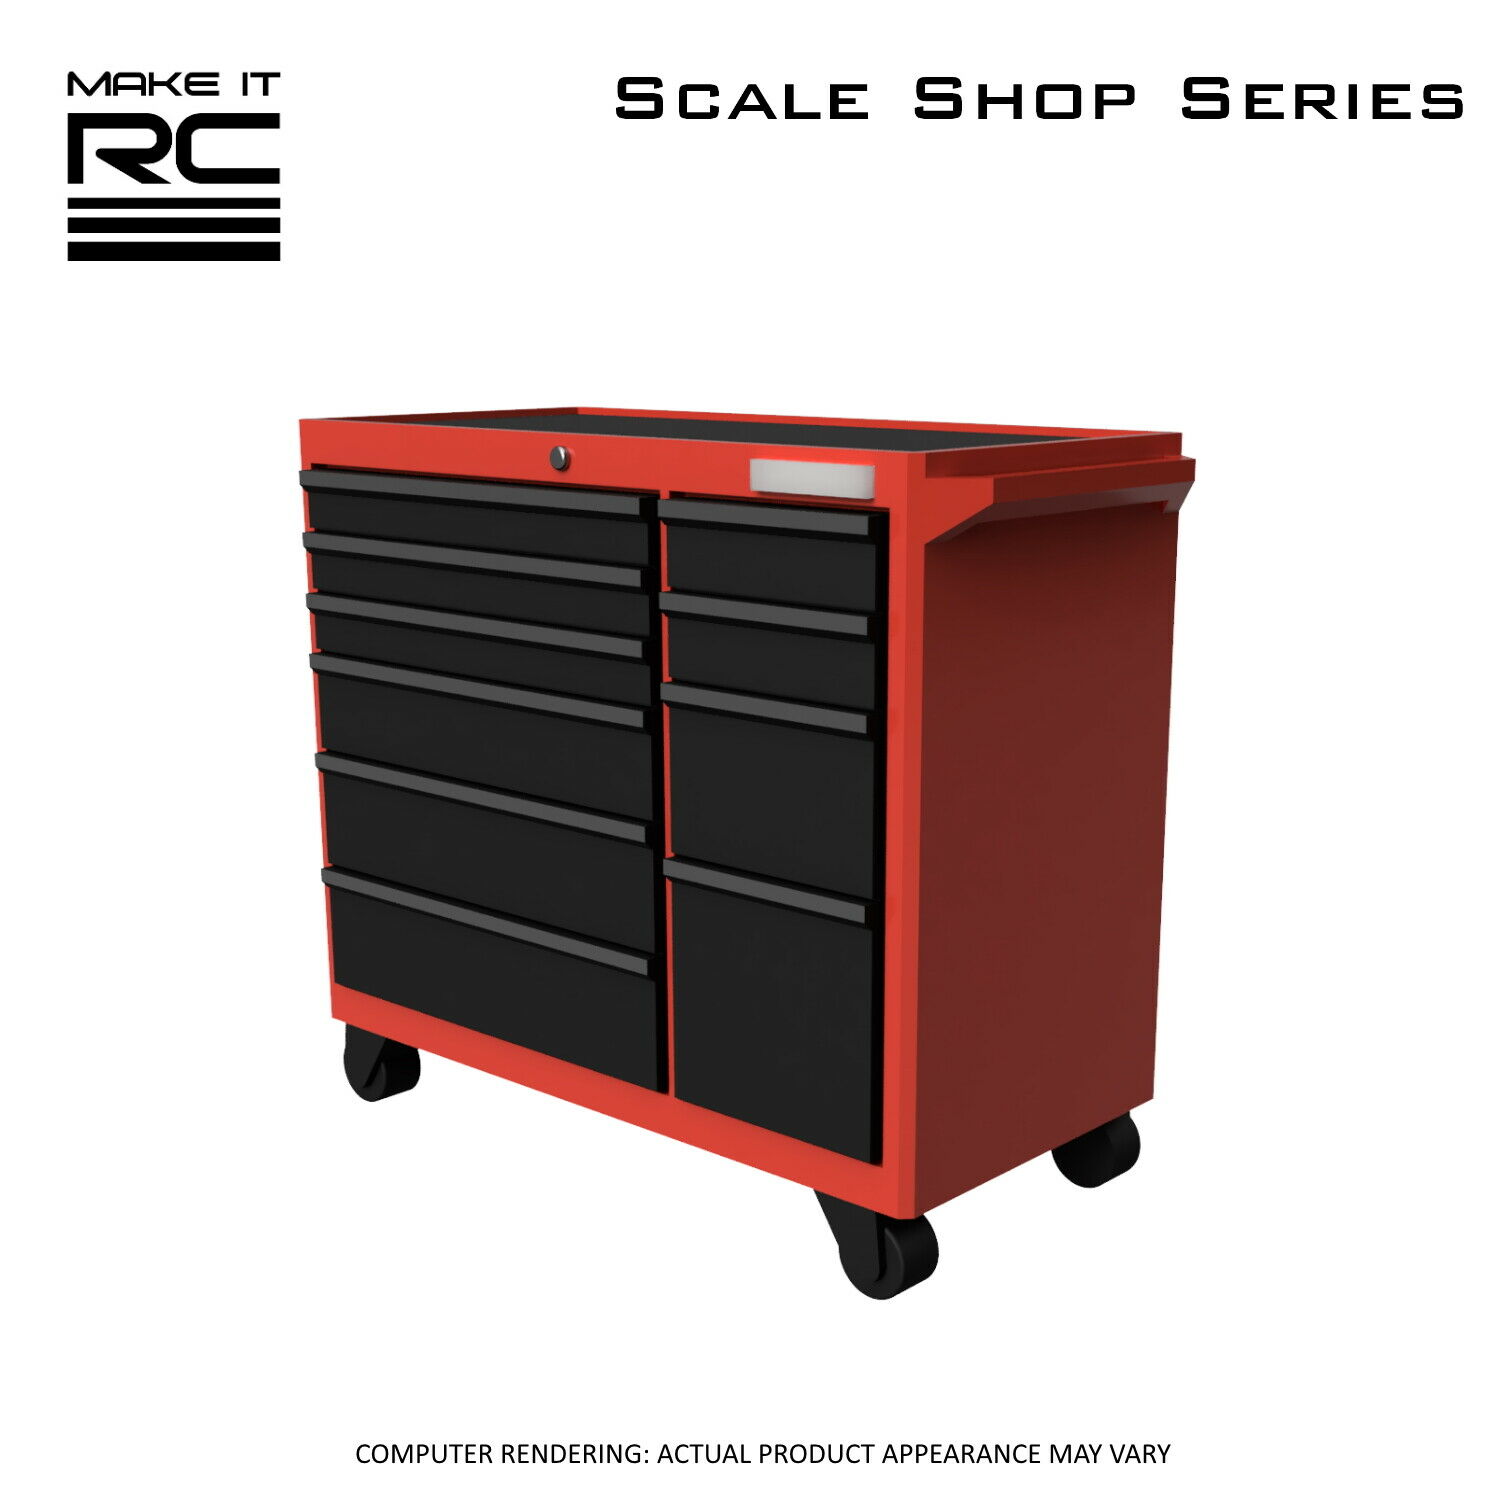 Make It Rc 1/24-1/25 Rolling Tool Chest For Model Car Garage, Shop, Diorama